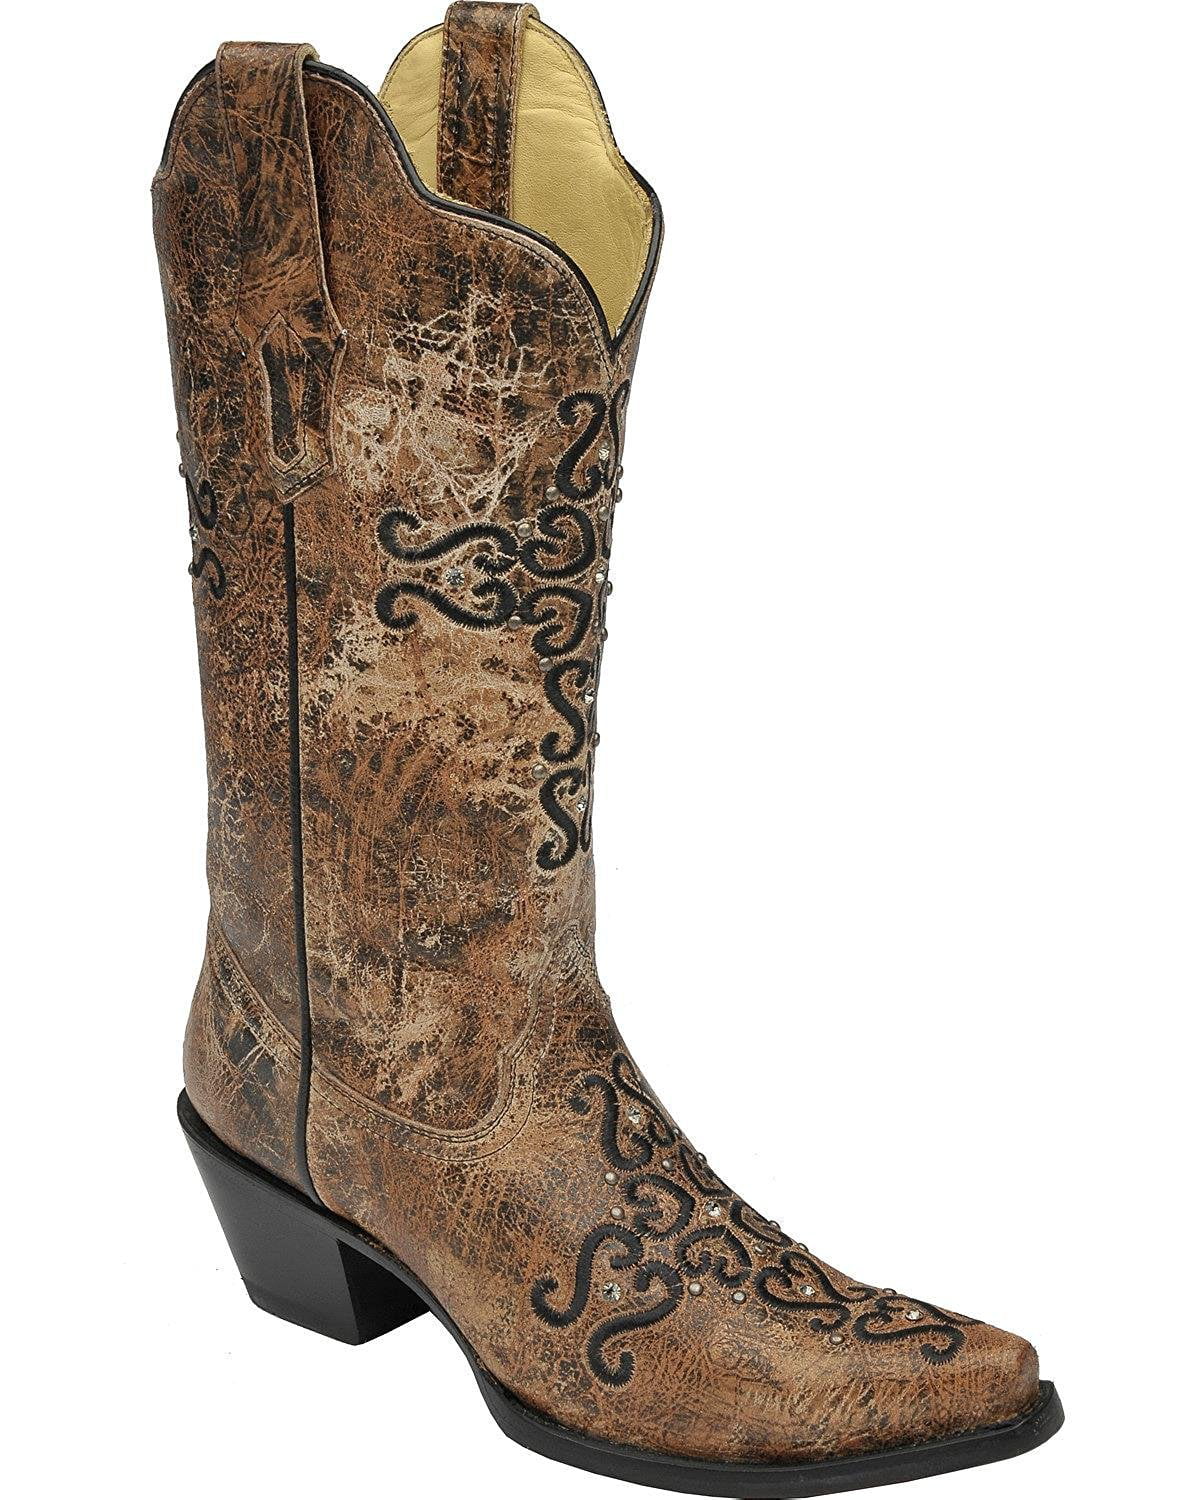 corral women's distressed boots